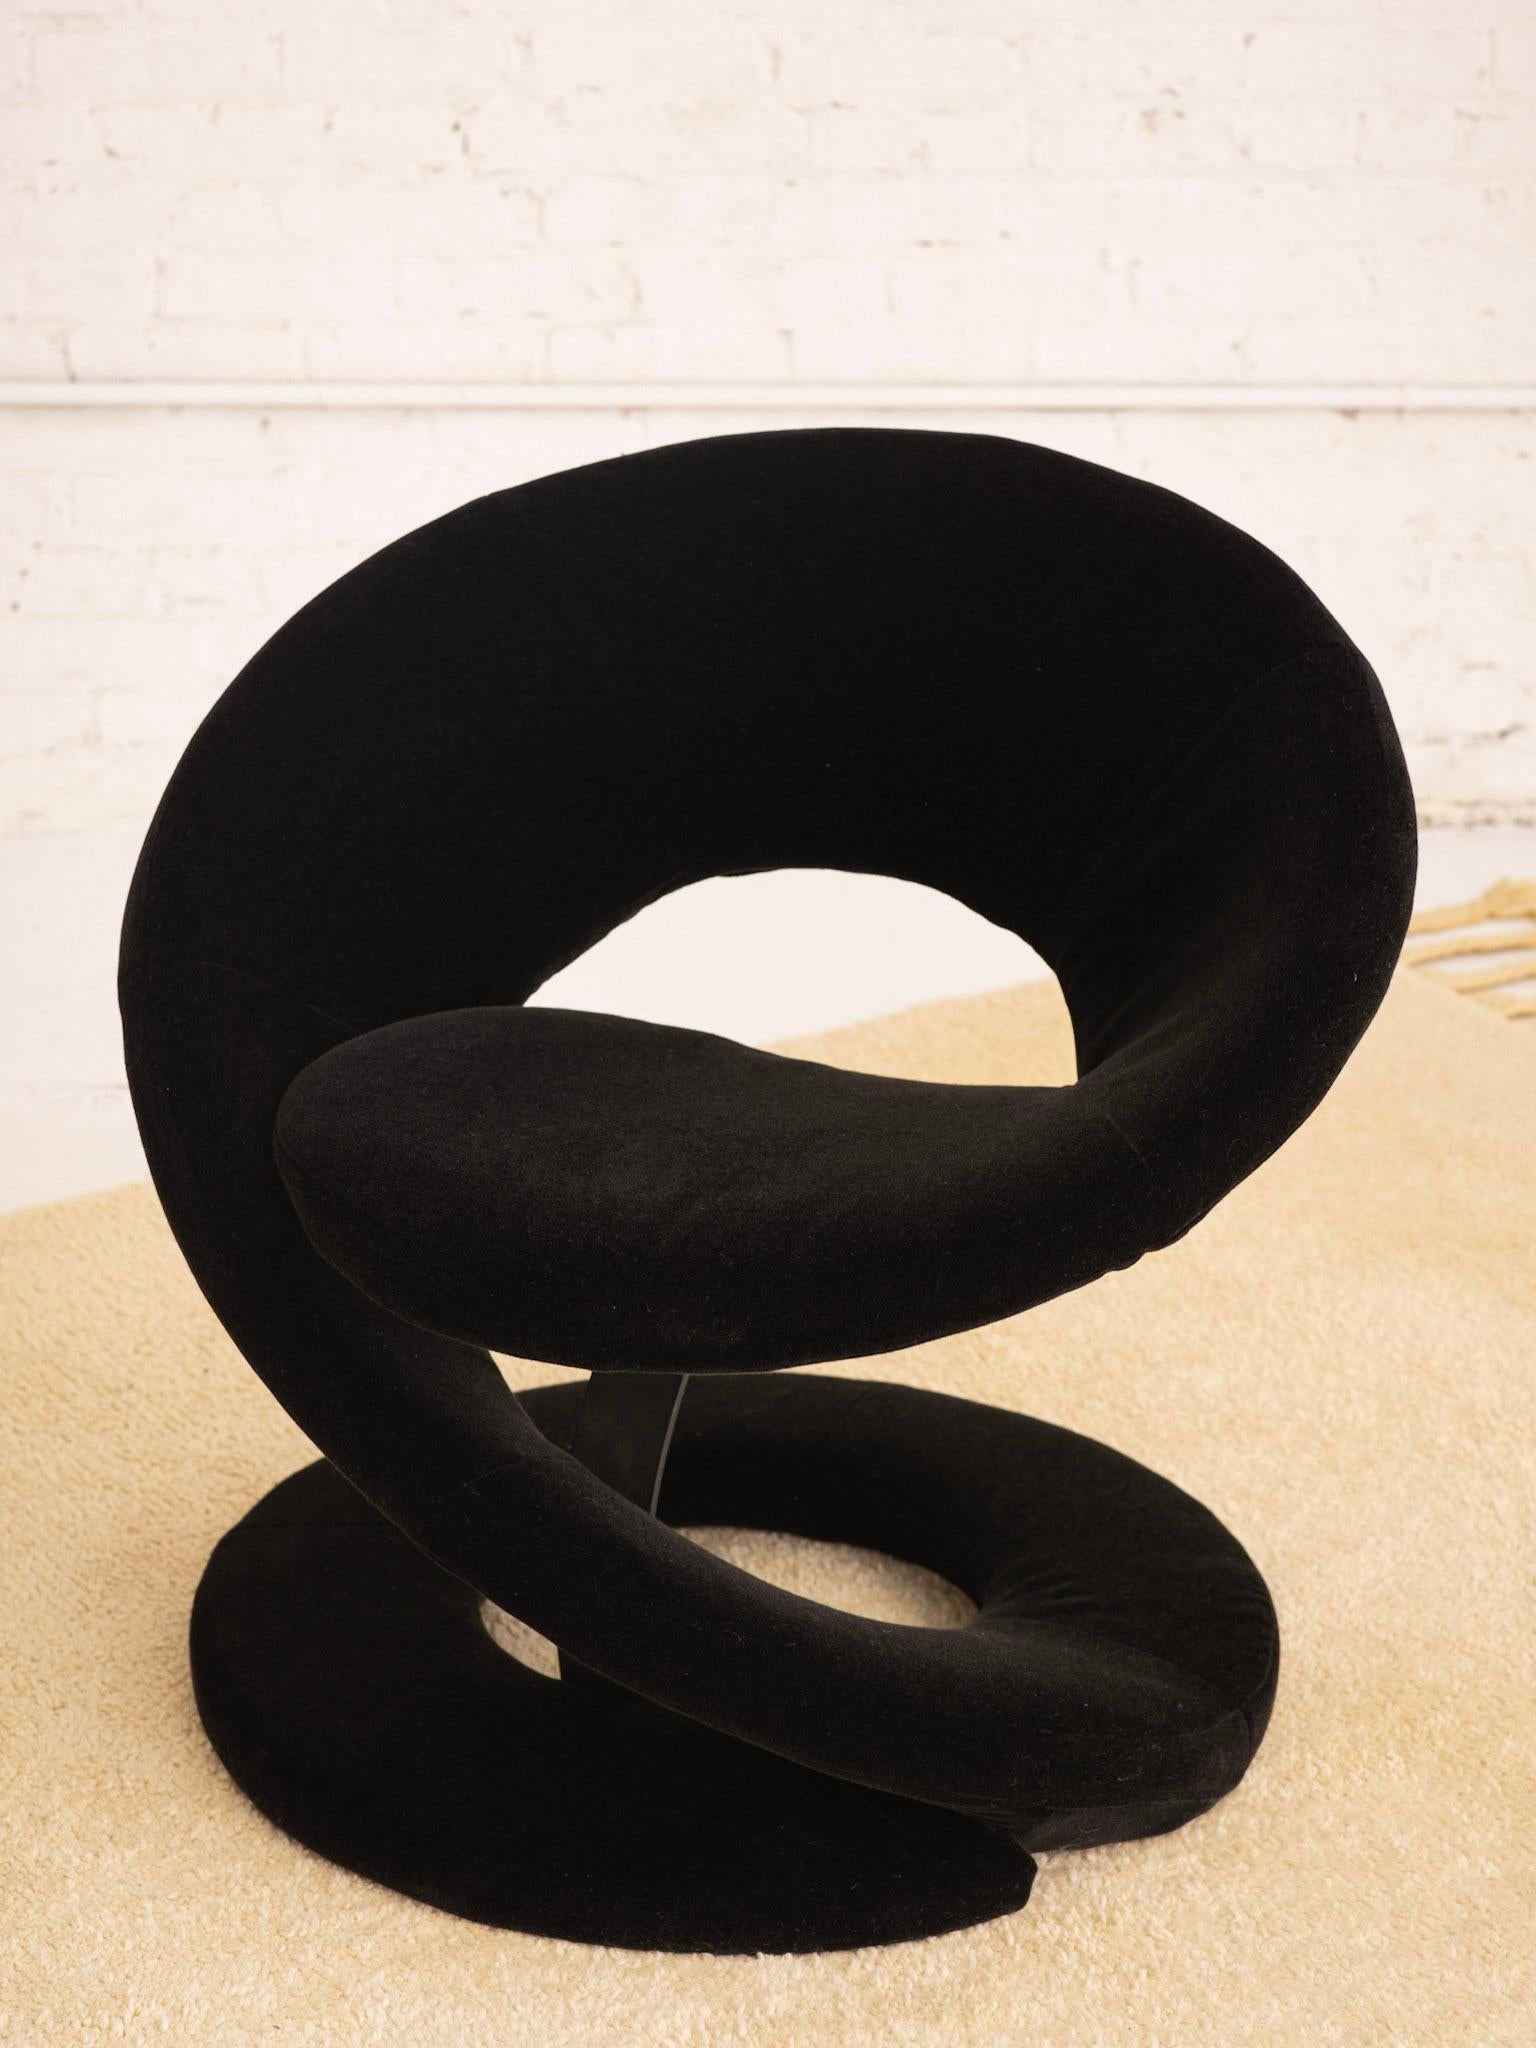 Sculptural spiral ribbon chair. Attributed to 